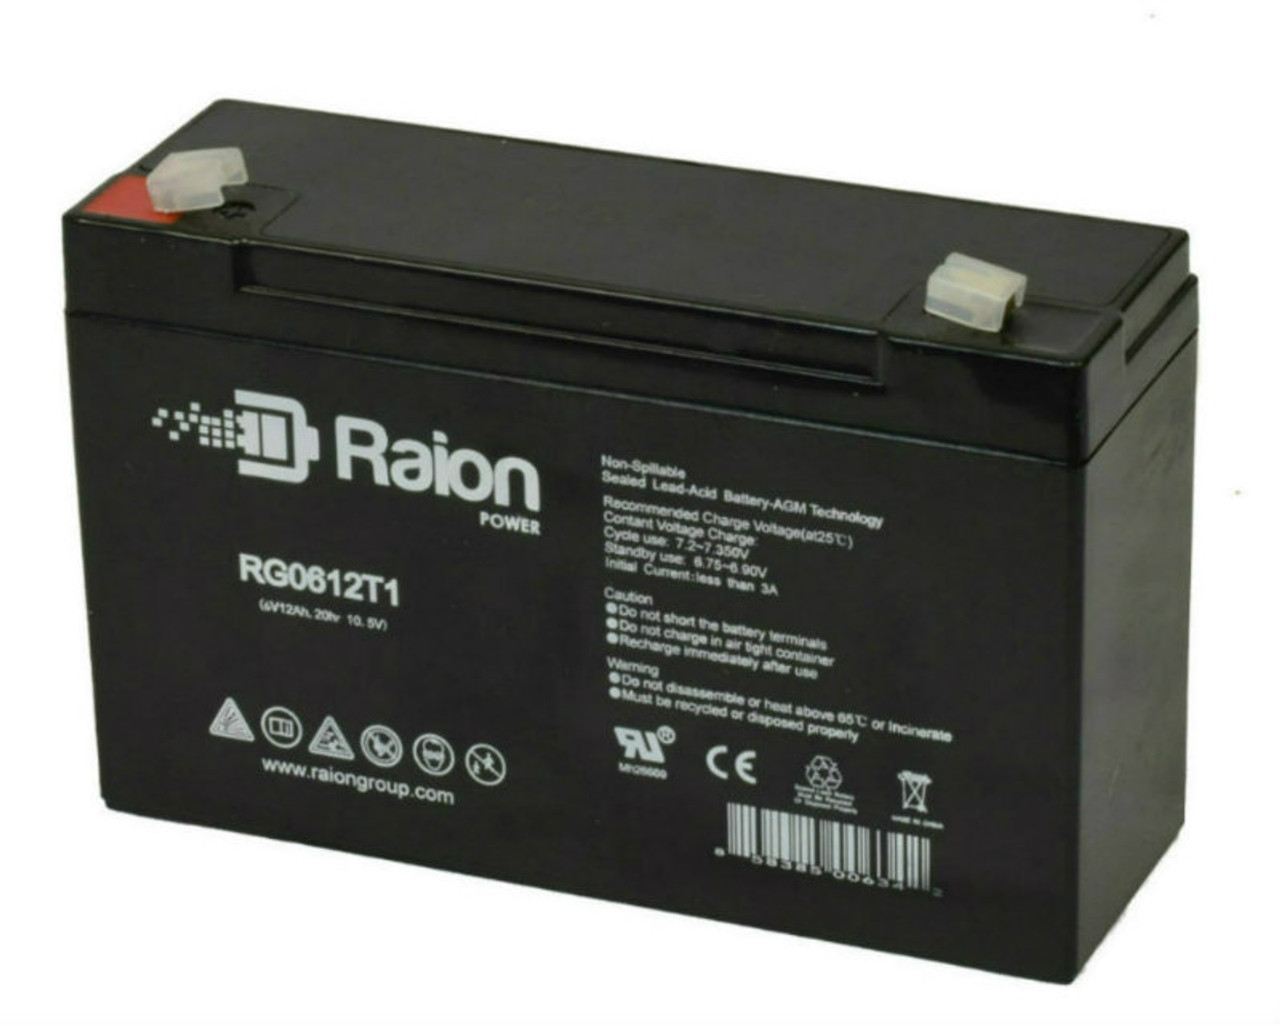 Raion Power RG06120T1 Replacement Battery for Technacell EP695 Leads & Fuse